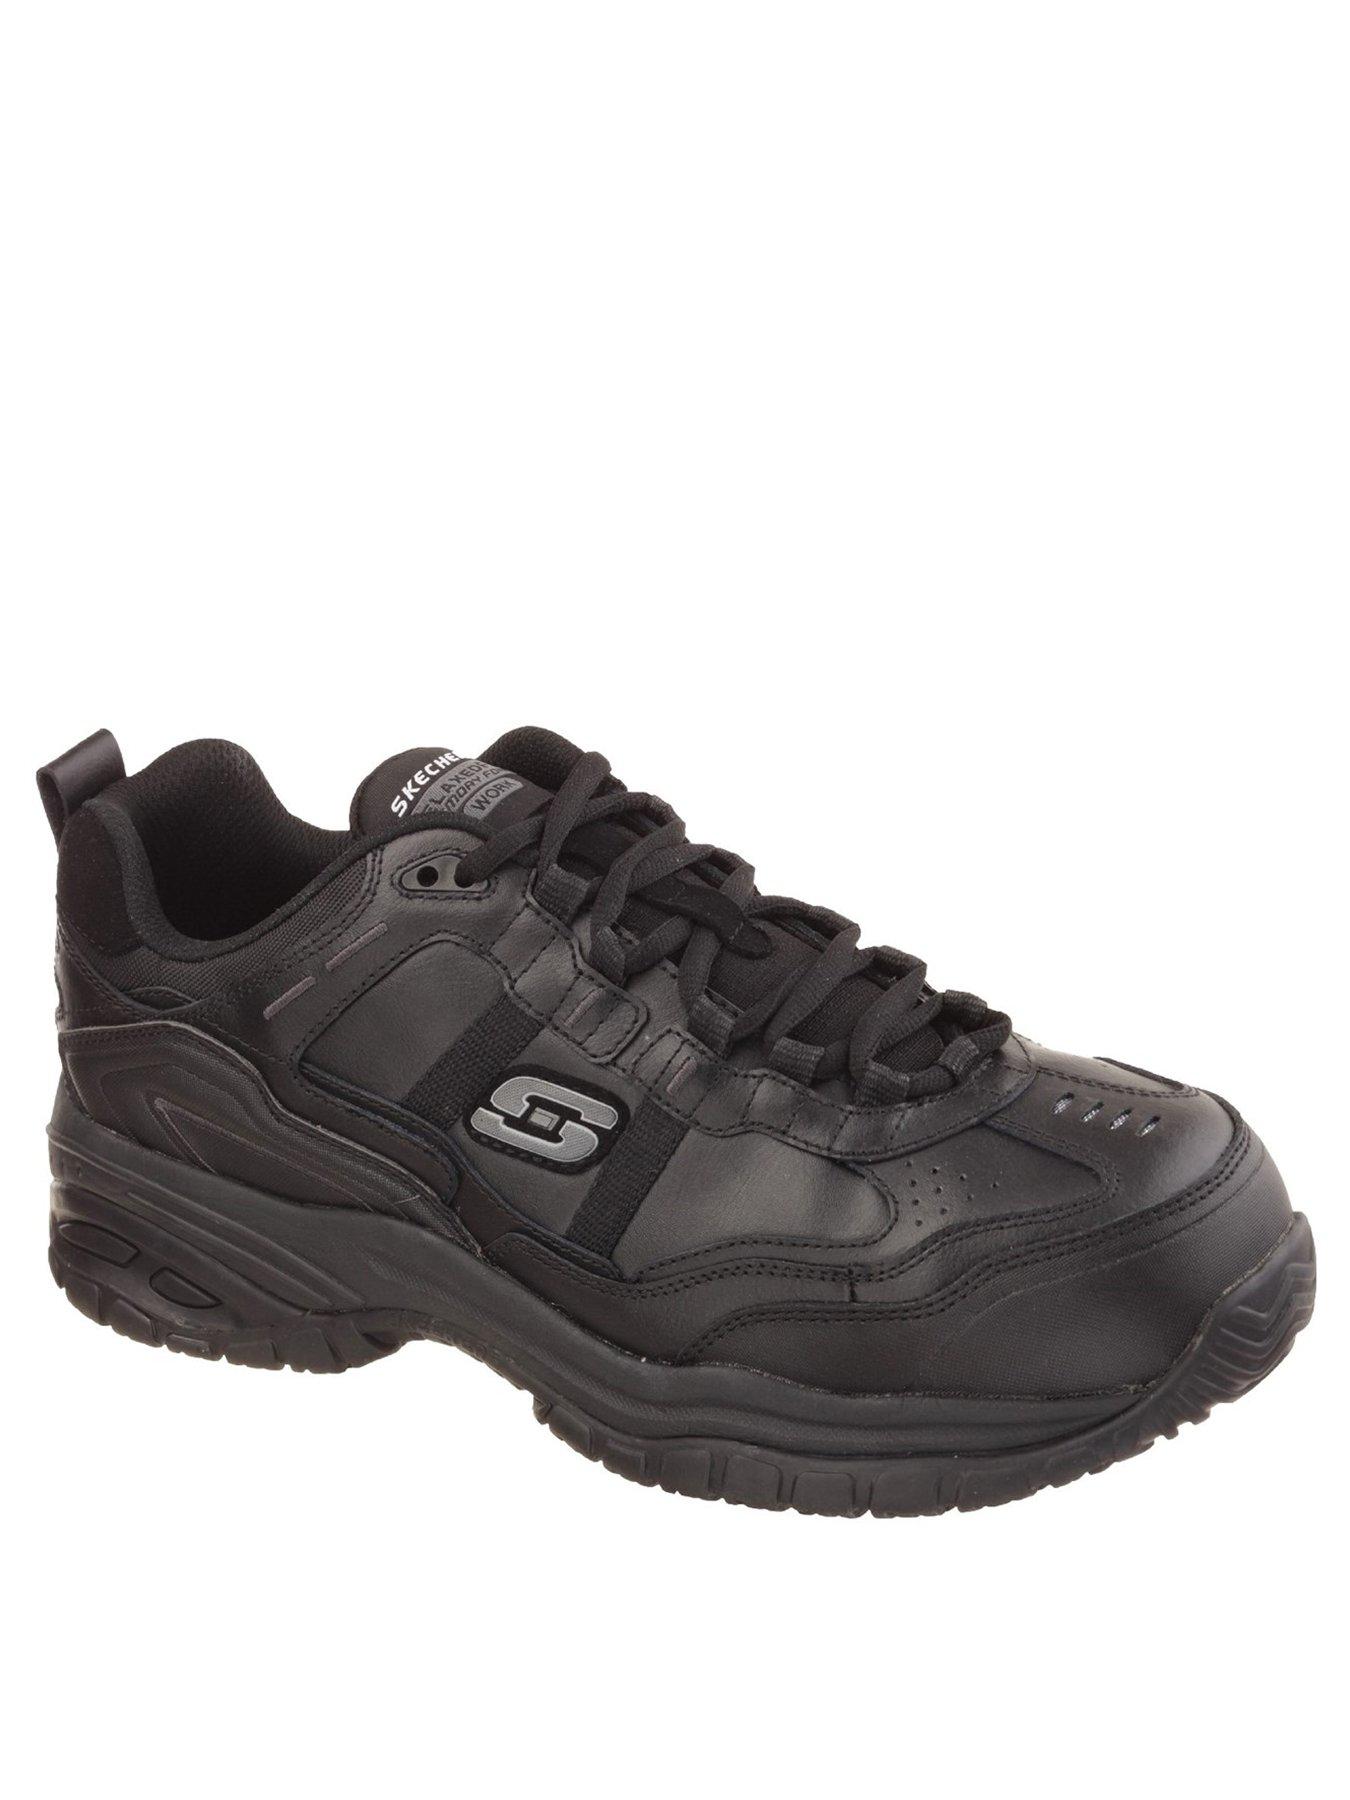 Skechers Relaxed Fit Lace Up Shoe - Black | Ireland